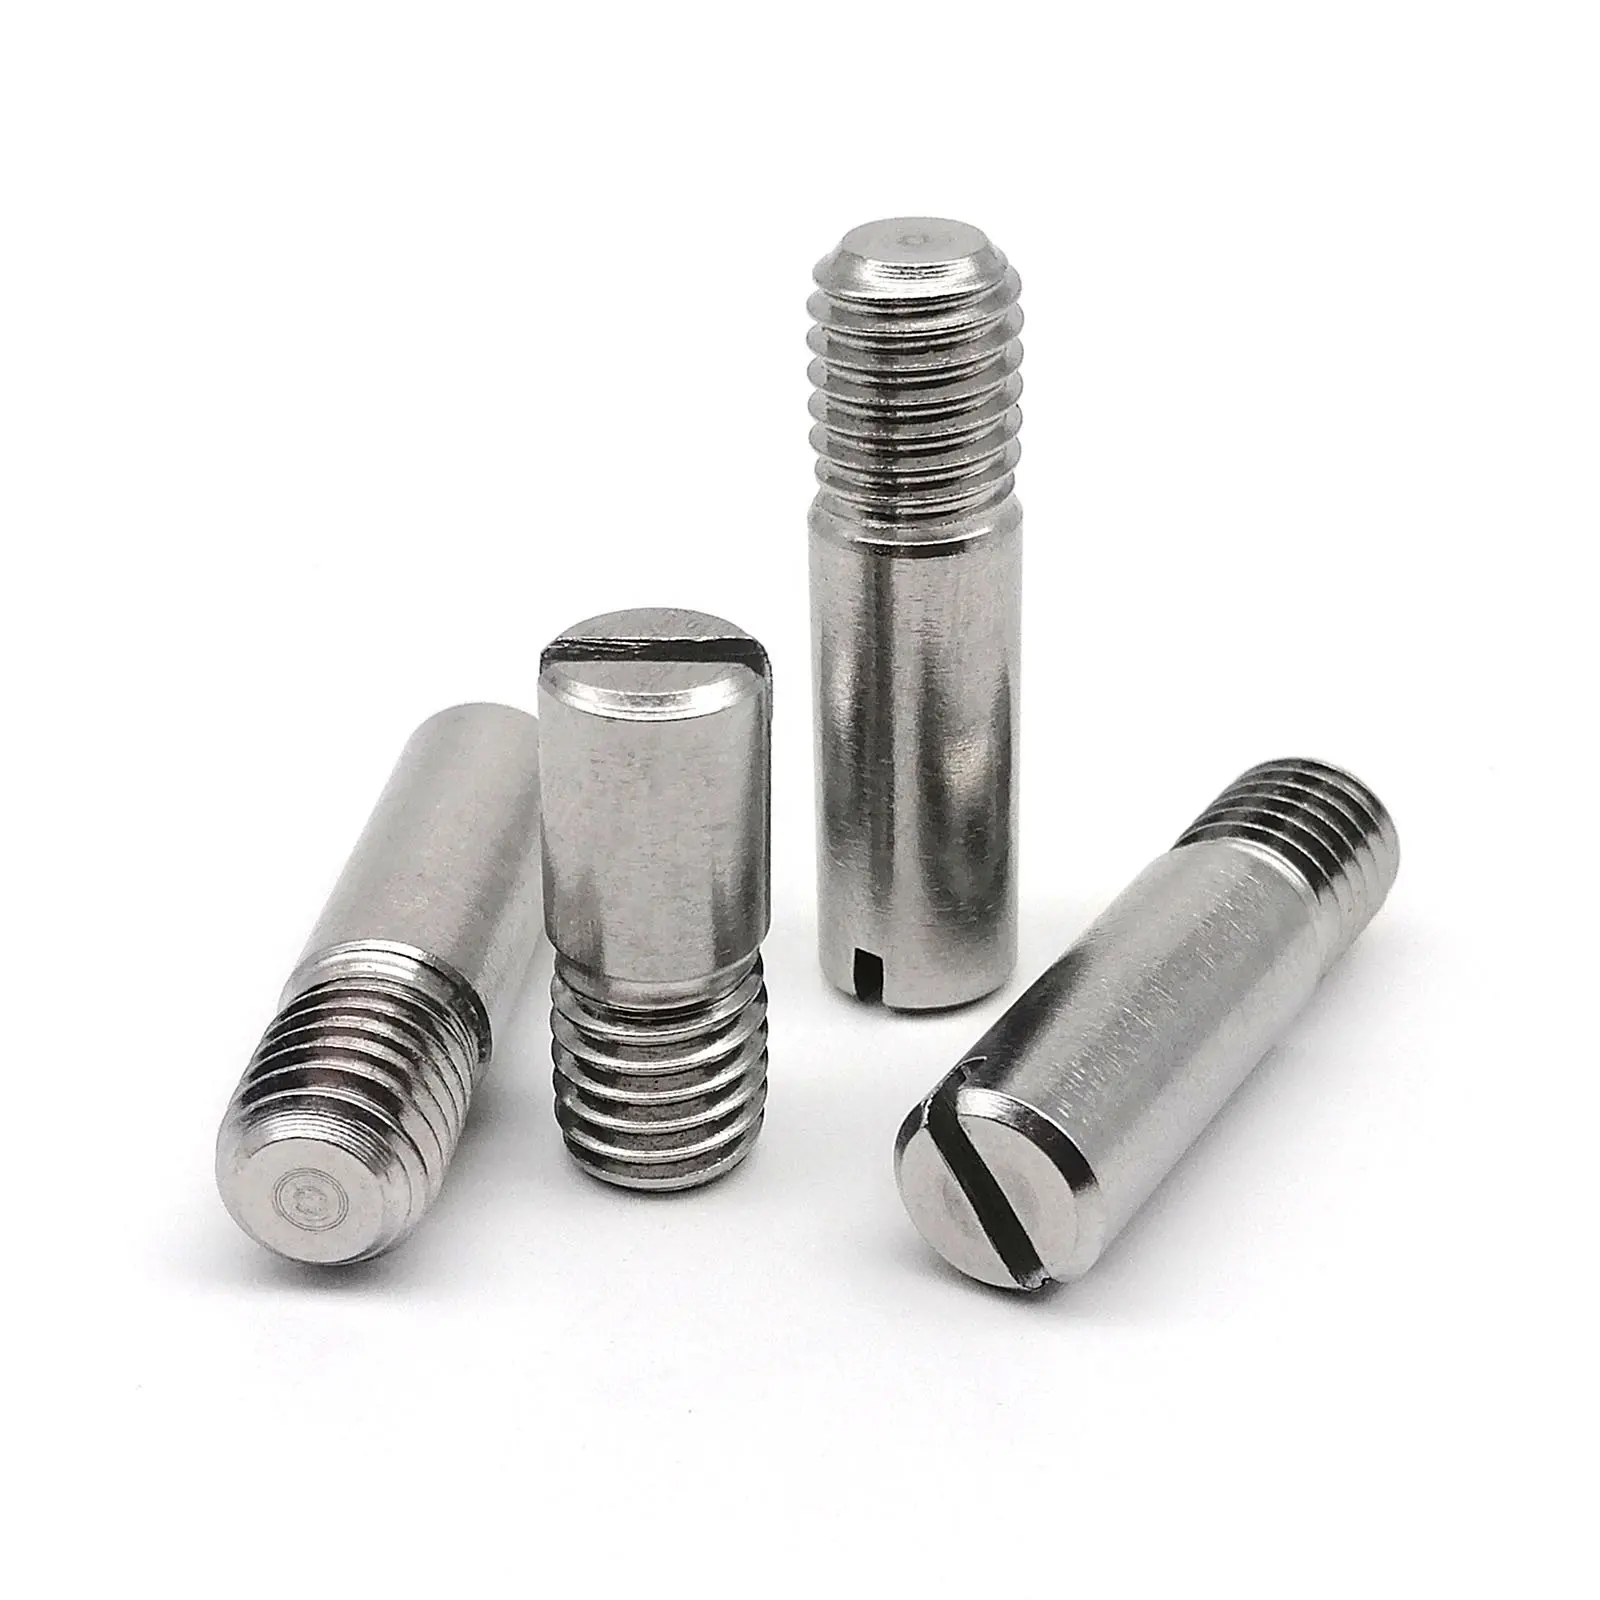 M2 M2.5 M3 M4 M5 M6 M8 M10 304 Stainless Steel GB878 External Screw Thread Cylindrical Fix Position Shaft Roll Dowel Pin